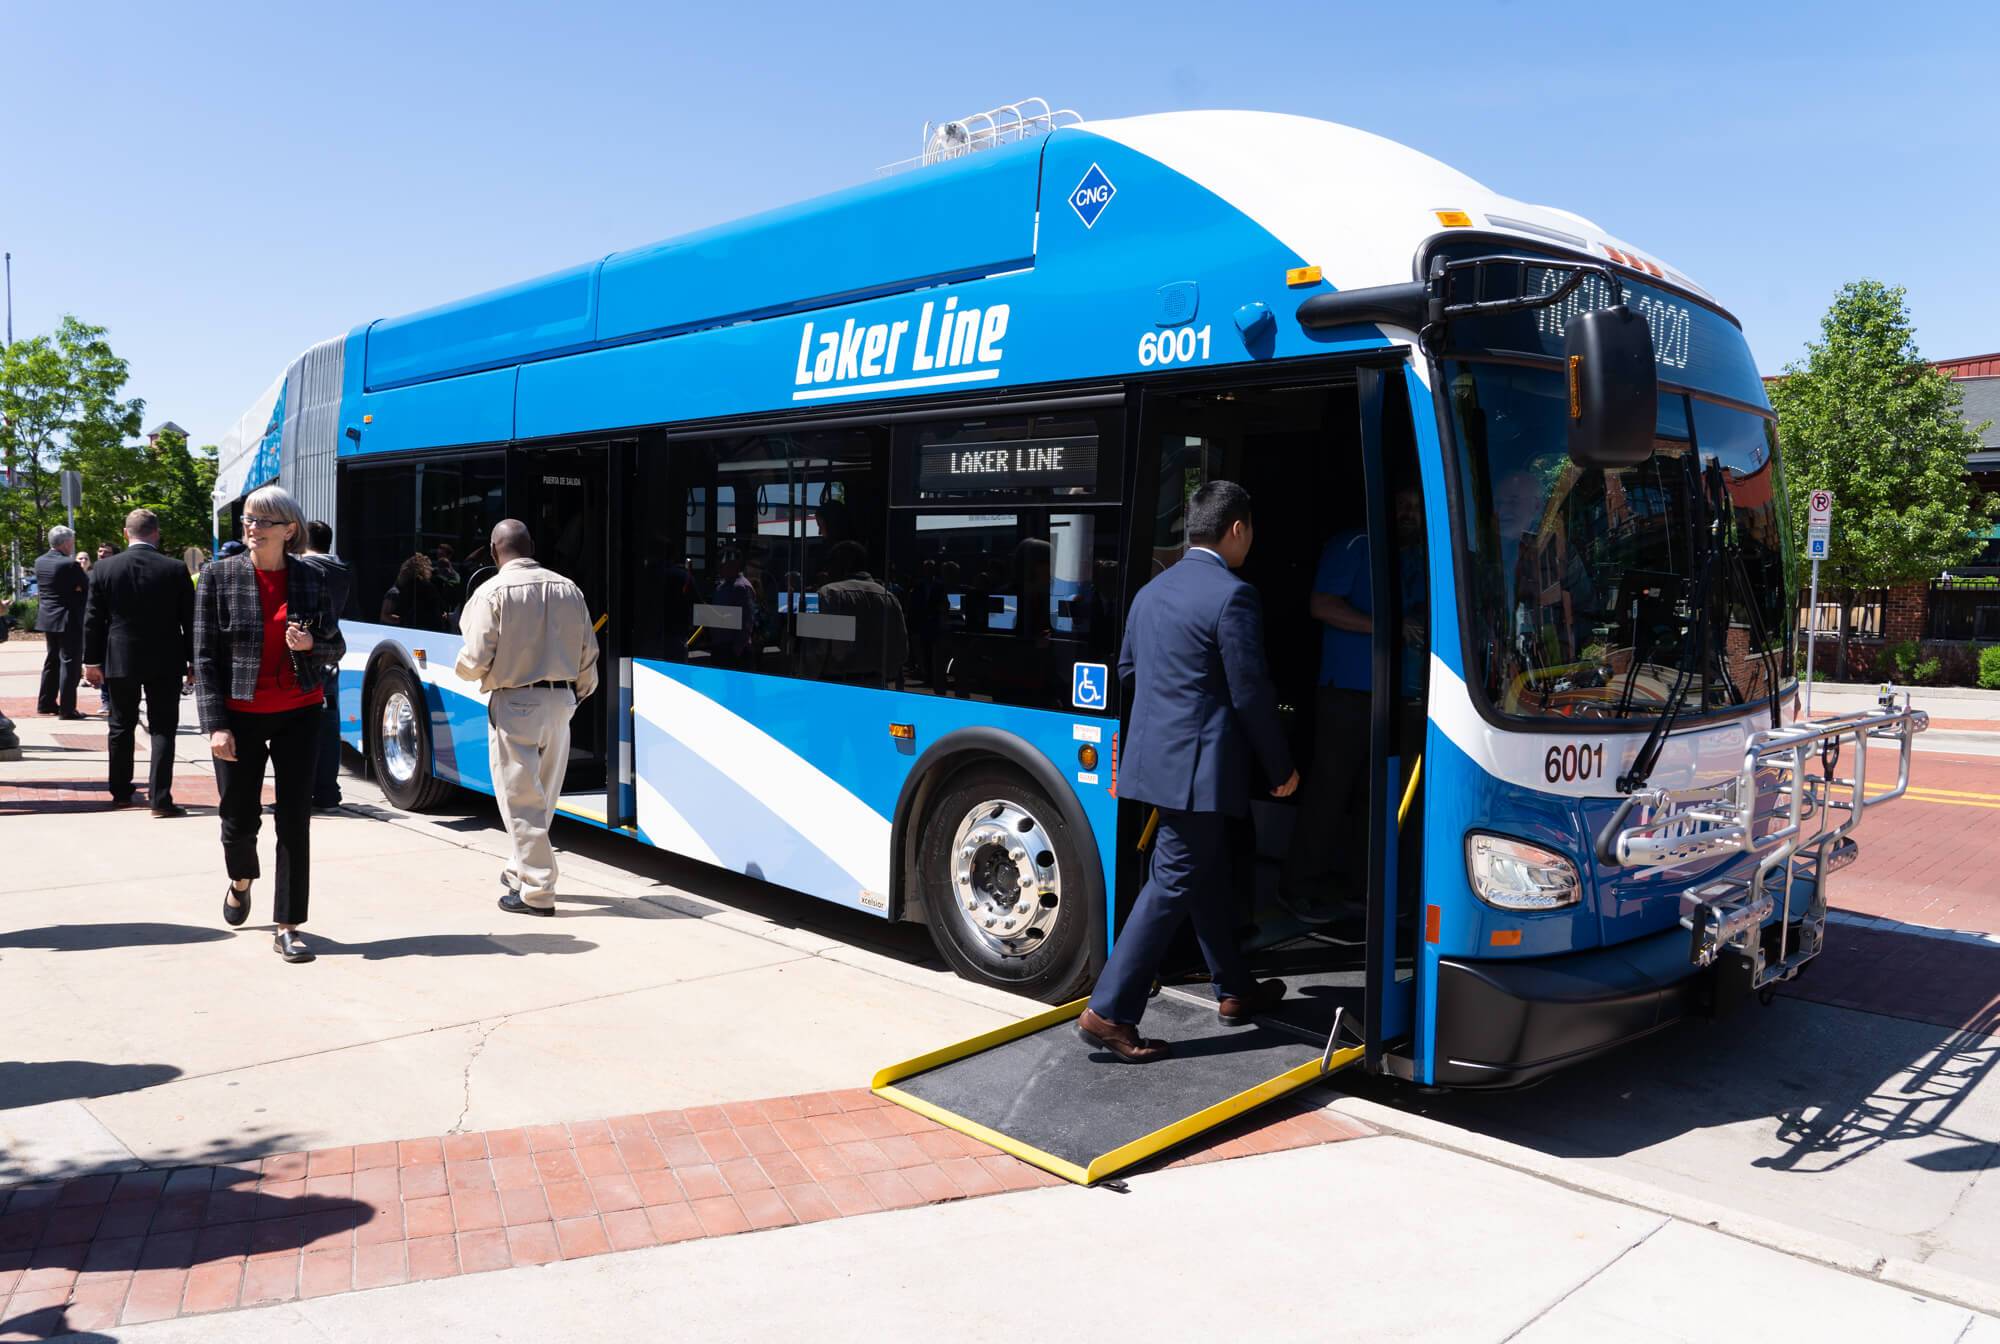 Passengers loading and unloading on the new Laker Line bus.